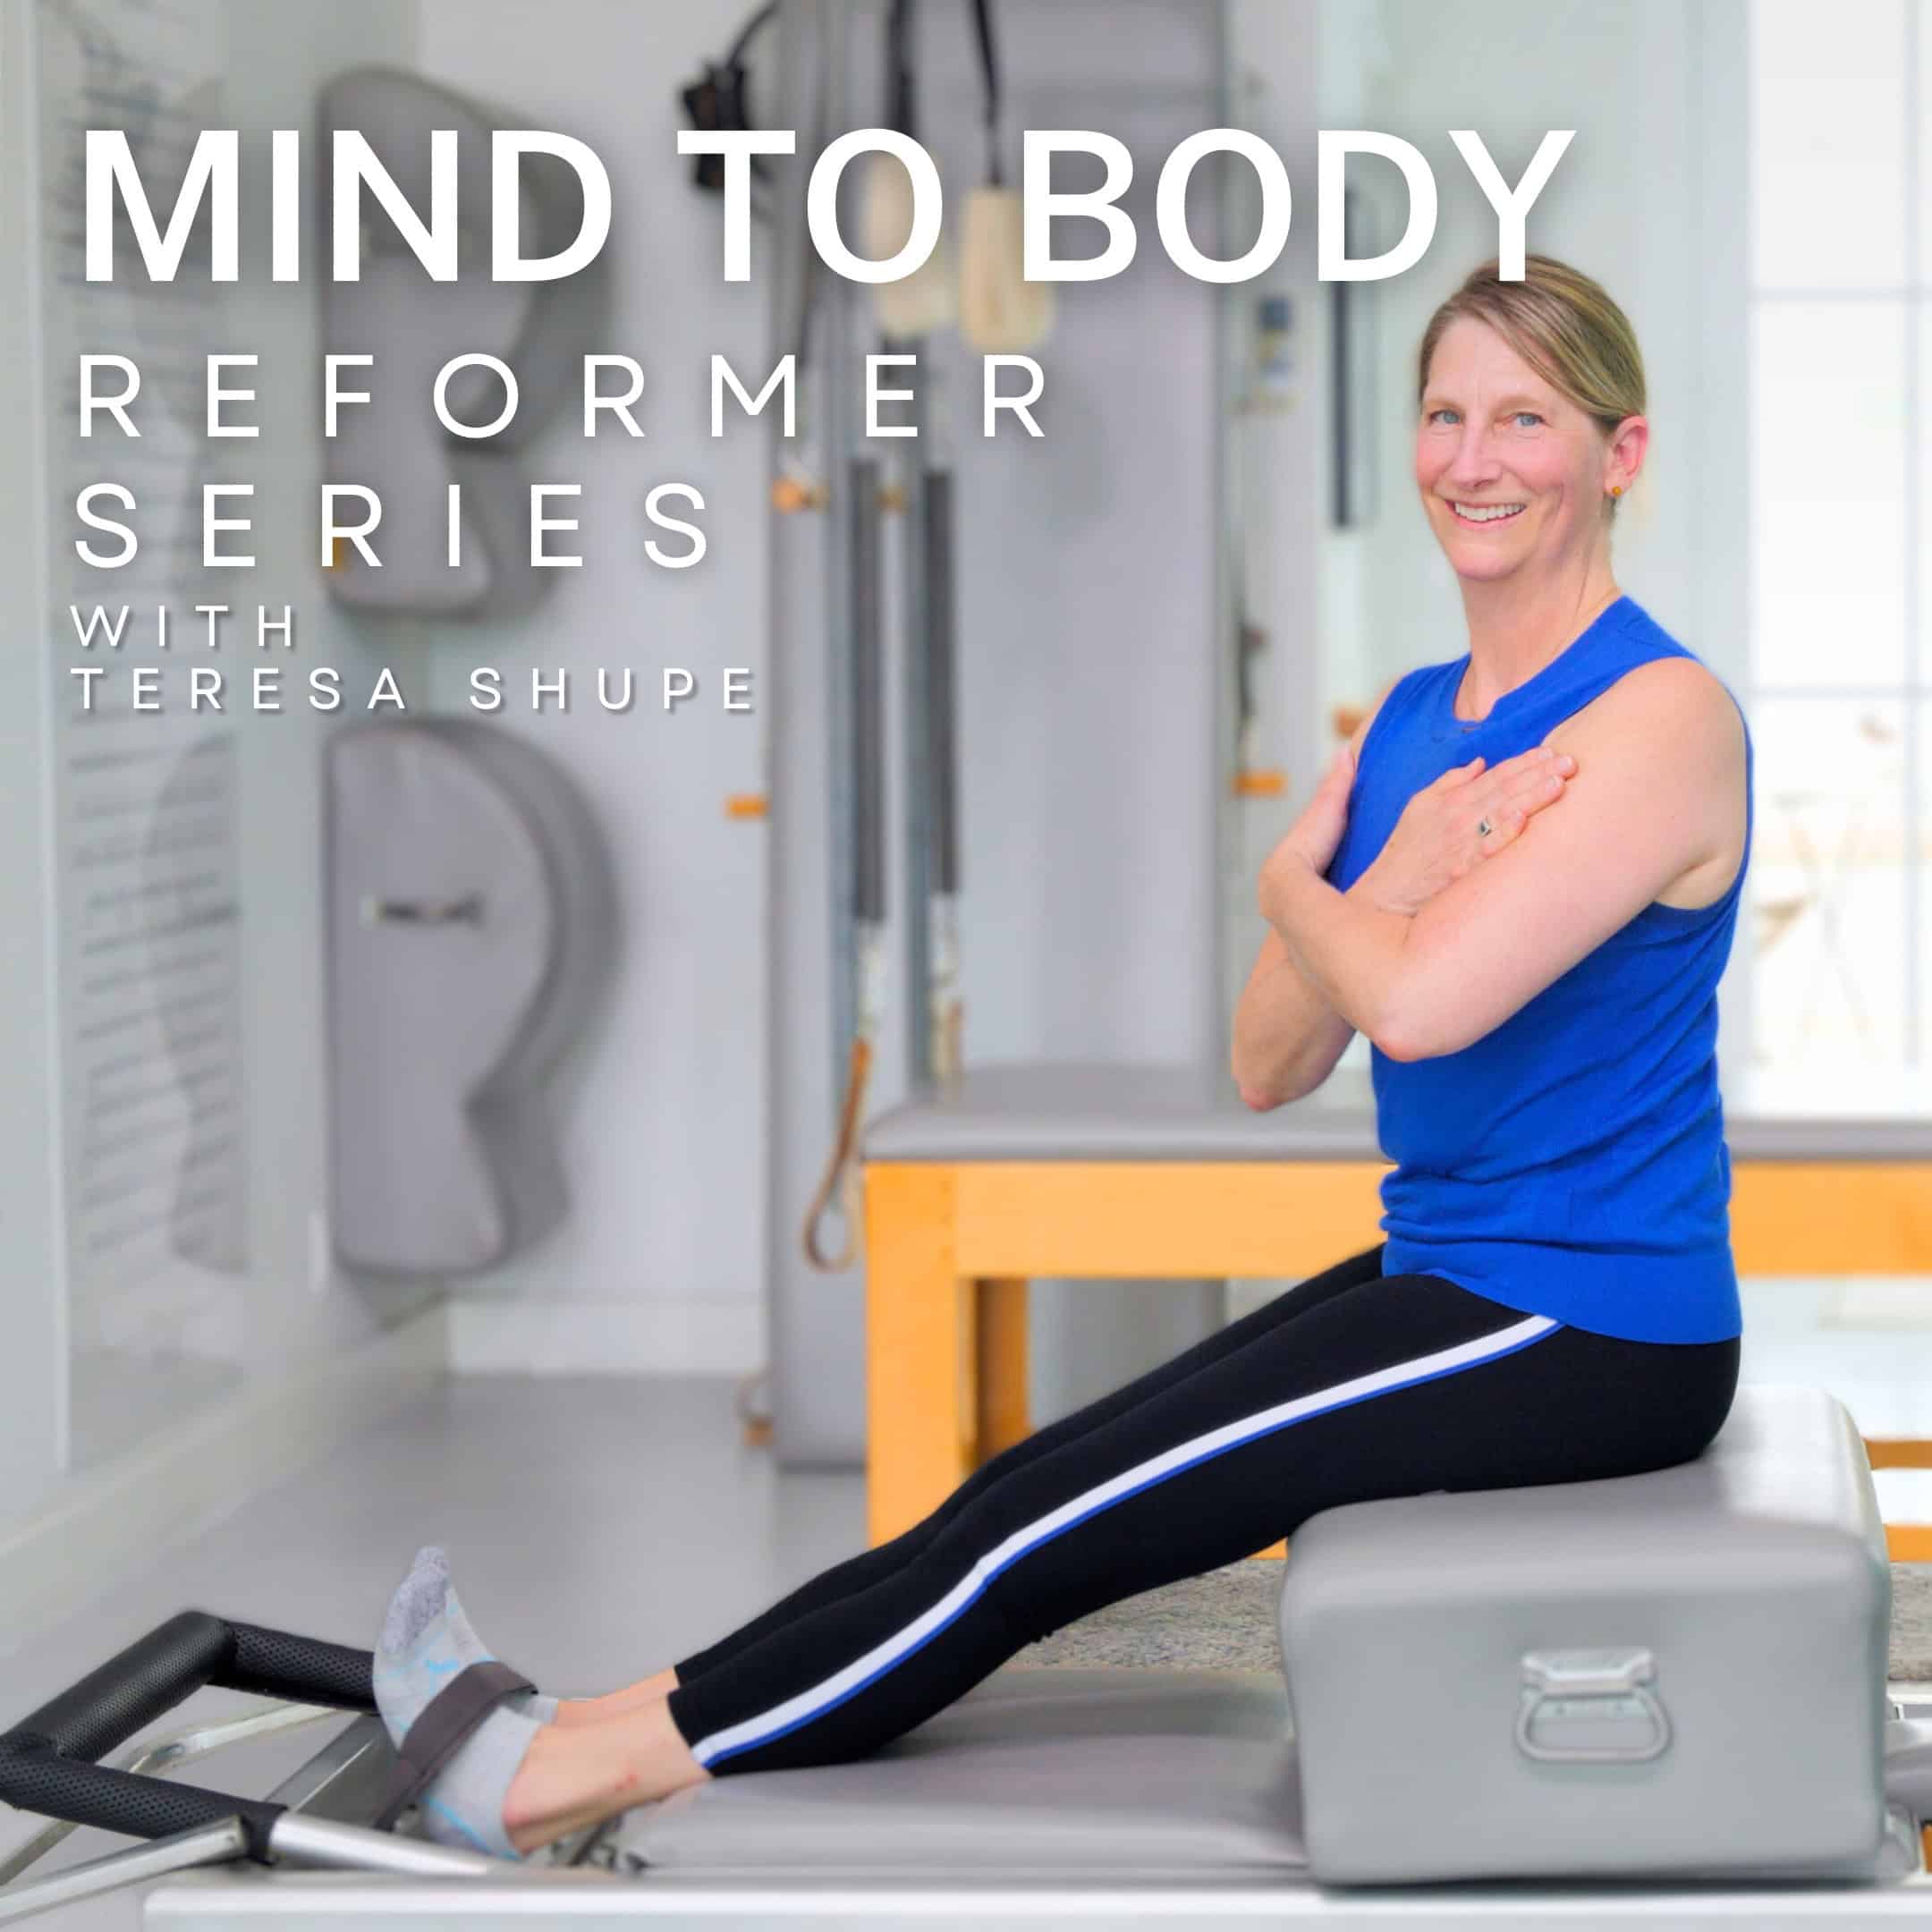 mind to body reformer series with teresa shupe, releasing june 16